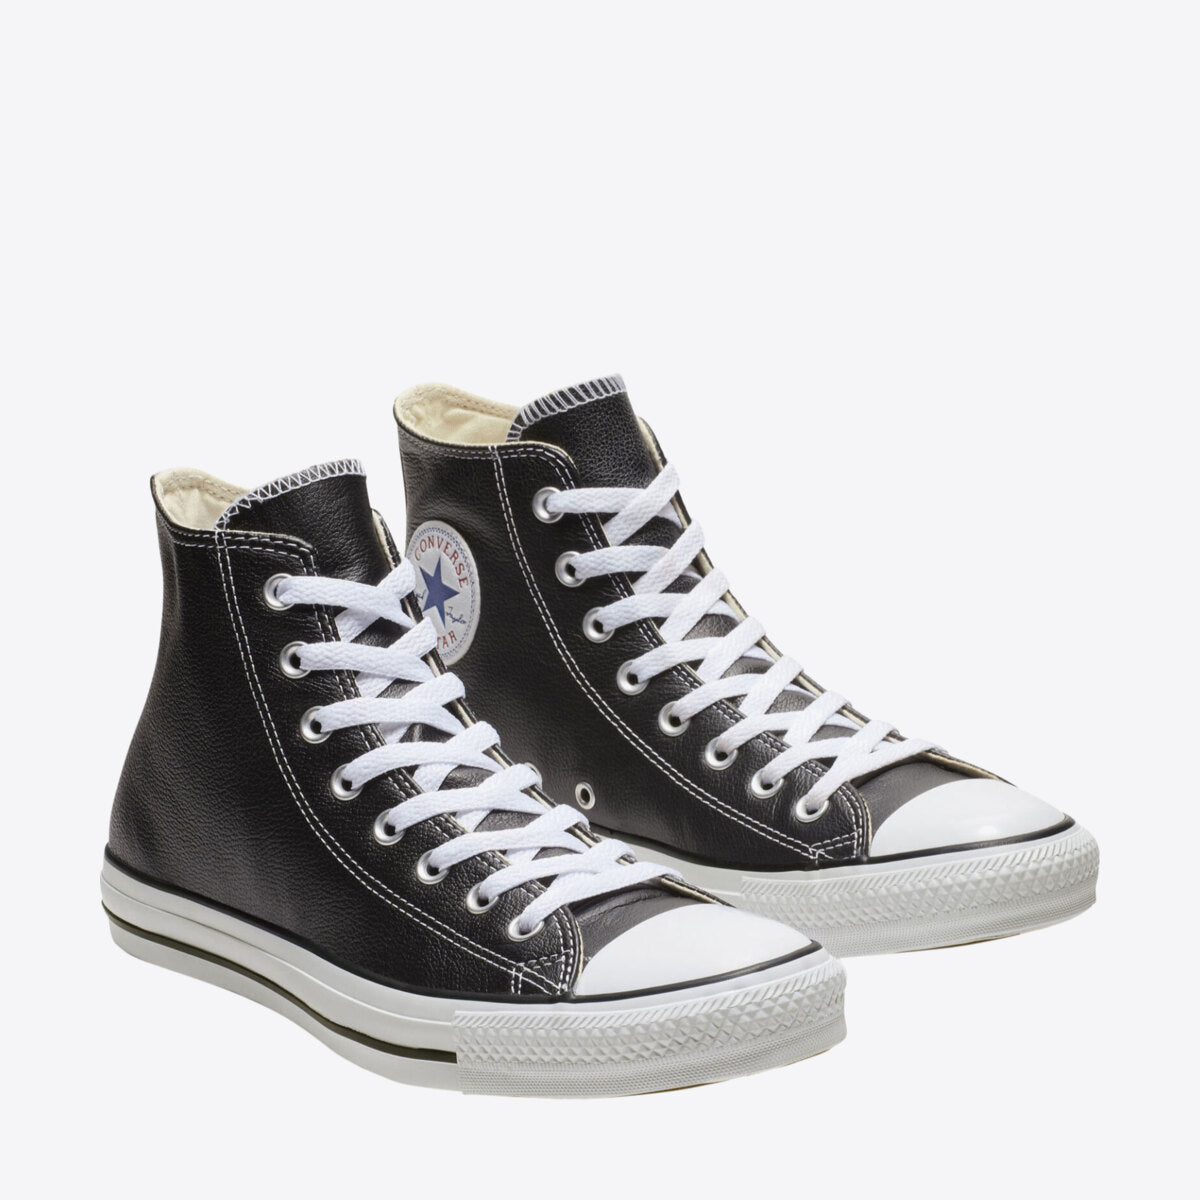 CONVERSE Chuck Taylor All Star Leather High Black - Image 4